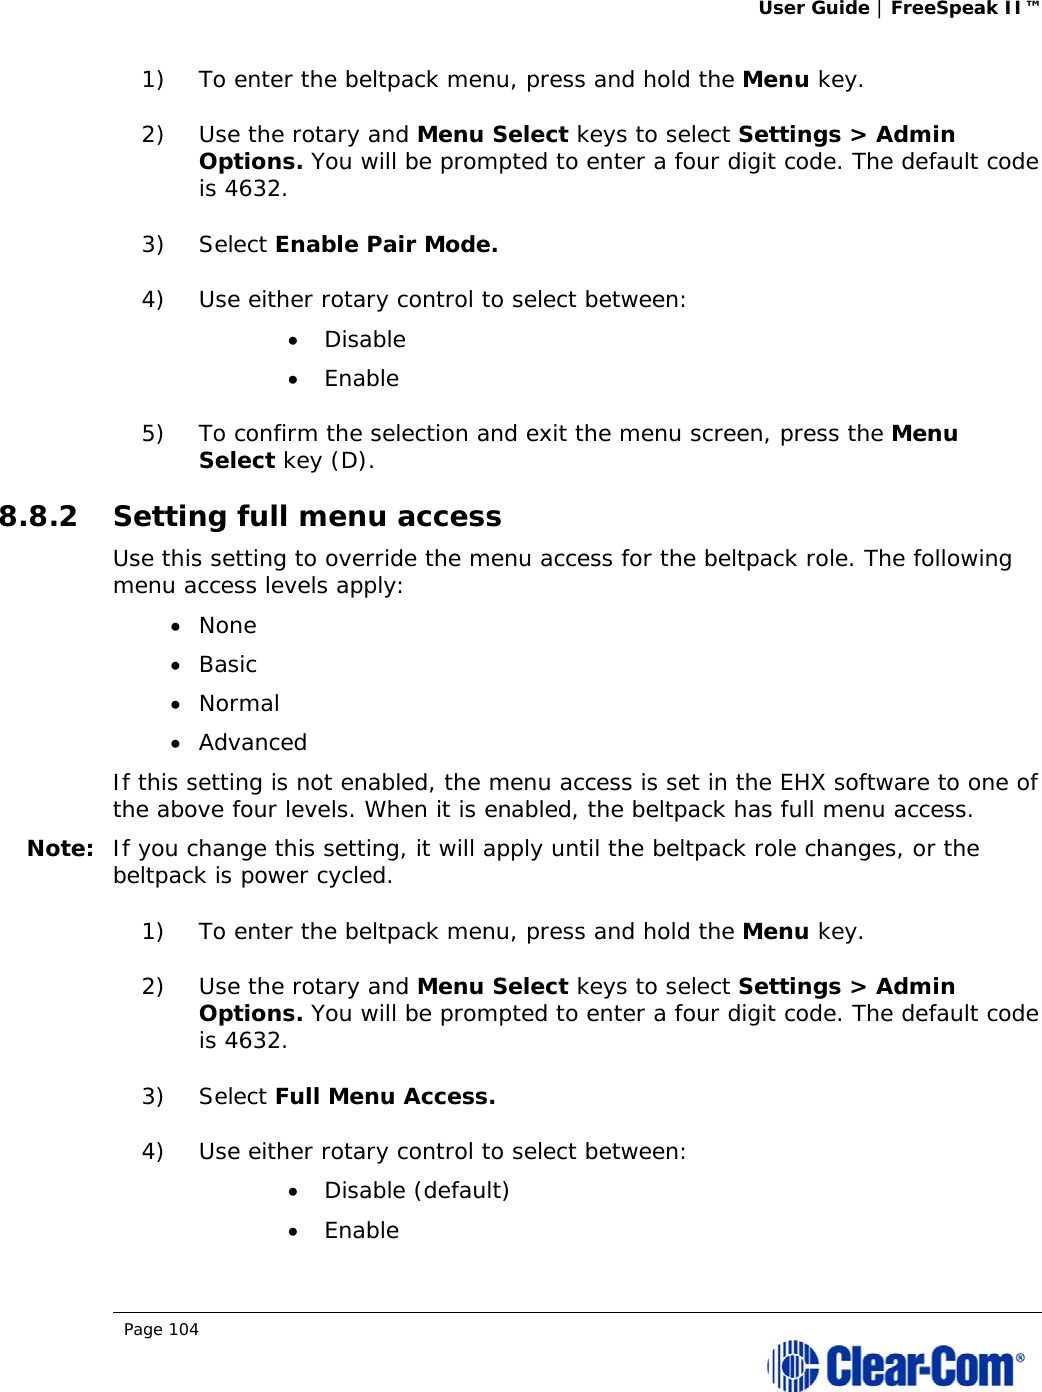 User Guide | FreeSpeak II™  Page 104  1) To enter the beltpack menu, press and hold the Menu key. 2) Use the rotary and Menu Select keys to select Settings &gt; Admin Options. You will be prompted to enter a four digit code. The default code is 4632. 3) Select Enable Pair Mode.  4) Use either rotary control to select between:  Disable  Enable 5) To confirm the selection and exit the menu screen, press the Menu Select key (D). 8.8.2 Setting full menu access Use this setting to override the menu access for the beltpack role. The following menu access levels apply:  None  Basic  Normal  Advanced If this setting is not enabled, the menu access is set in the EHX software to one of the above four levels. When it is enabled, the beltpack has full menu access. Note: If you change this setting, it will apply until the beltpack role changes, or the beltpack is power cycled. 1) To enter the beltpack menu, press and hold the Menu key. 2) Use the rotary and Menu Select keys to select Settings &gt; Admin Options. You will be prompted to enter a four digit code. The default code is 4632. 3) Select Full Menu Access.  4) Use either rotary control to select between:  Disable (default)  Enable 